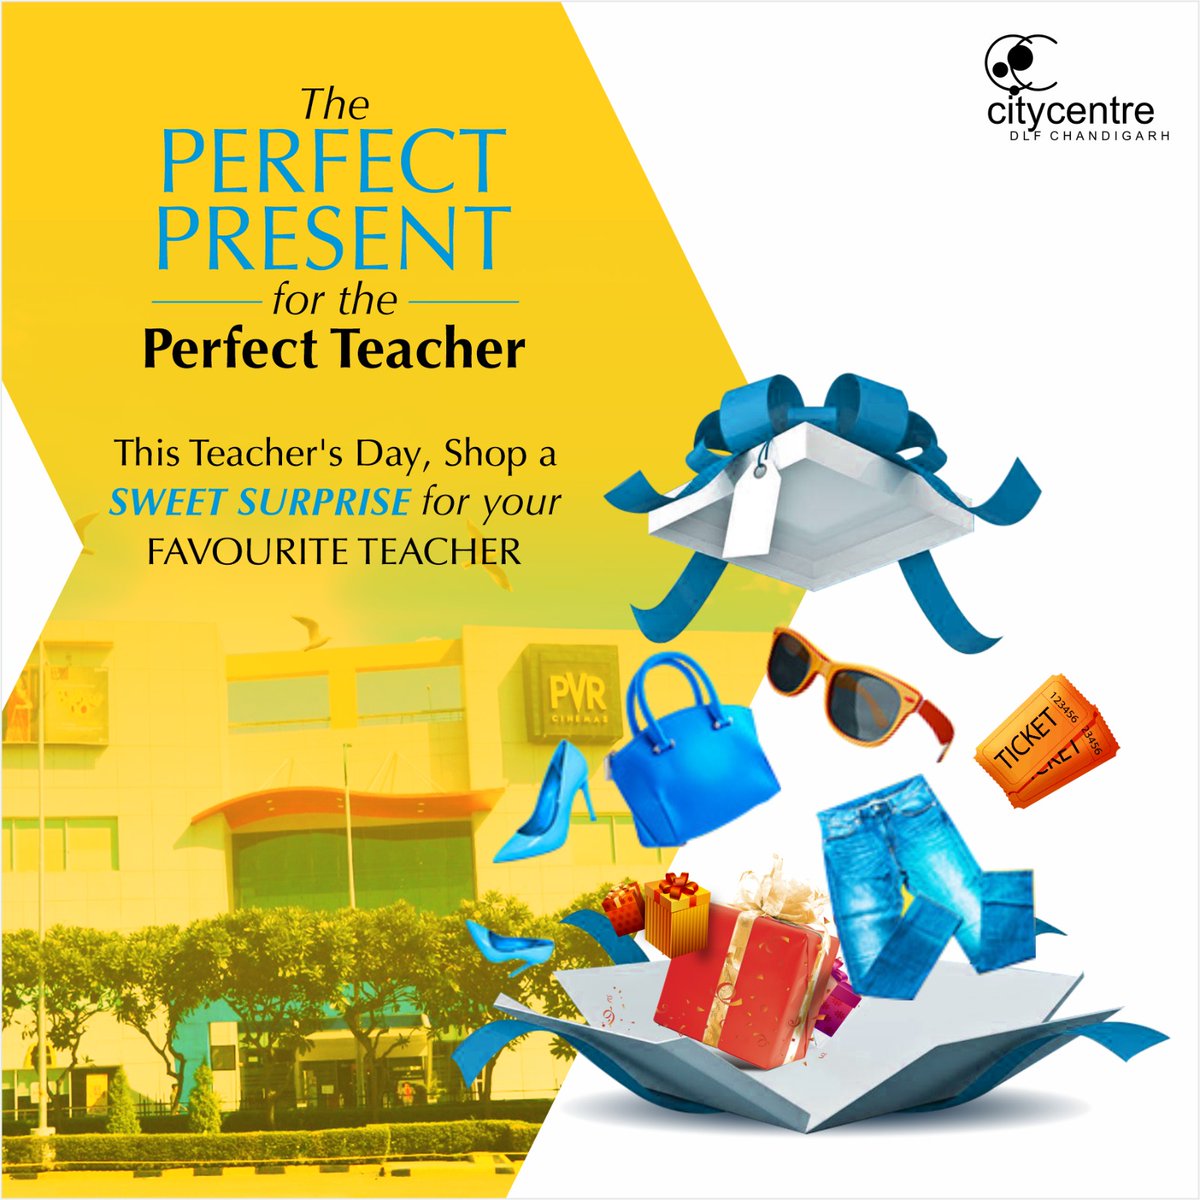 For your #FavouriteTeacher!
#TeachersDay is around the corner & it’s time to give back to the Pioneers of Learnings in your Life with the Perfect Present from the Leading Brand Outlets at #DLFCityCentreChandigarh.
#surprisegift #teacherdayoffer #TeachersDaySpecial #dlfmall